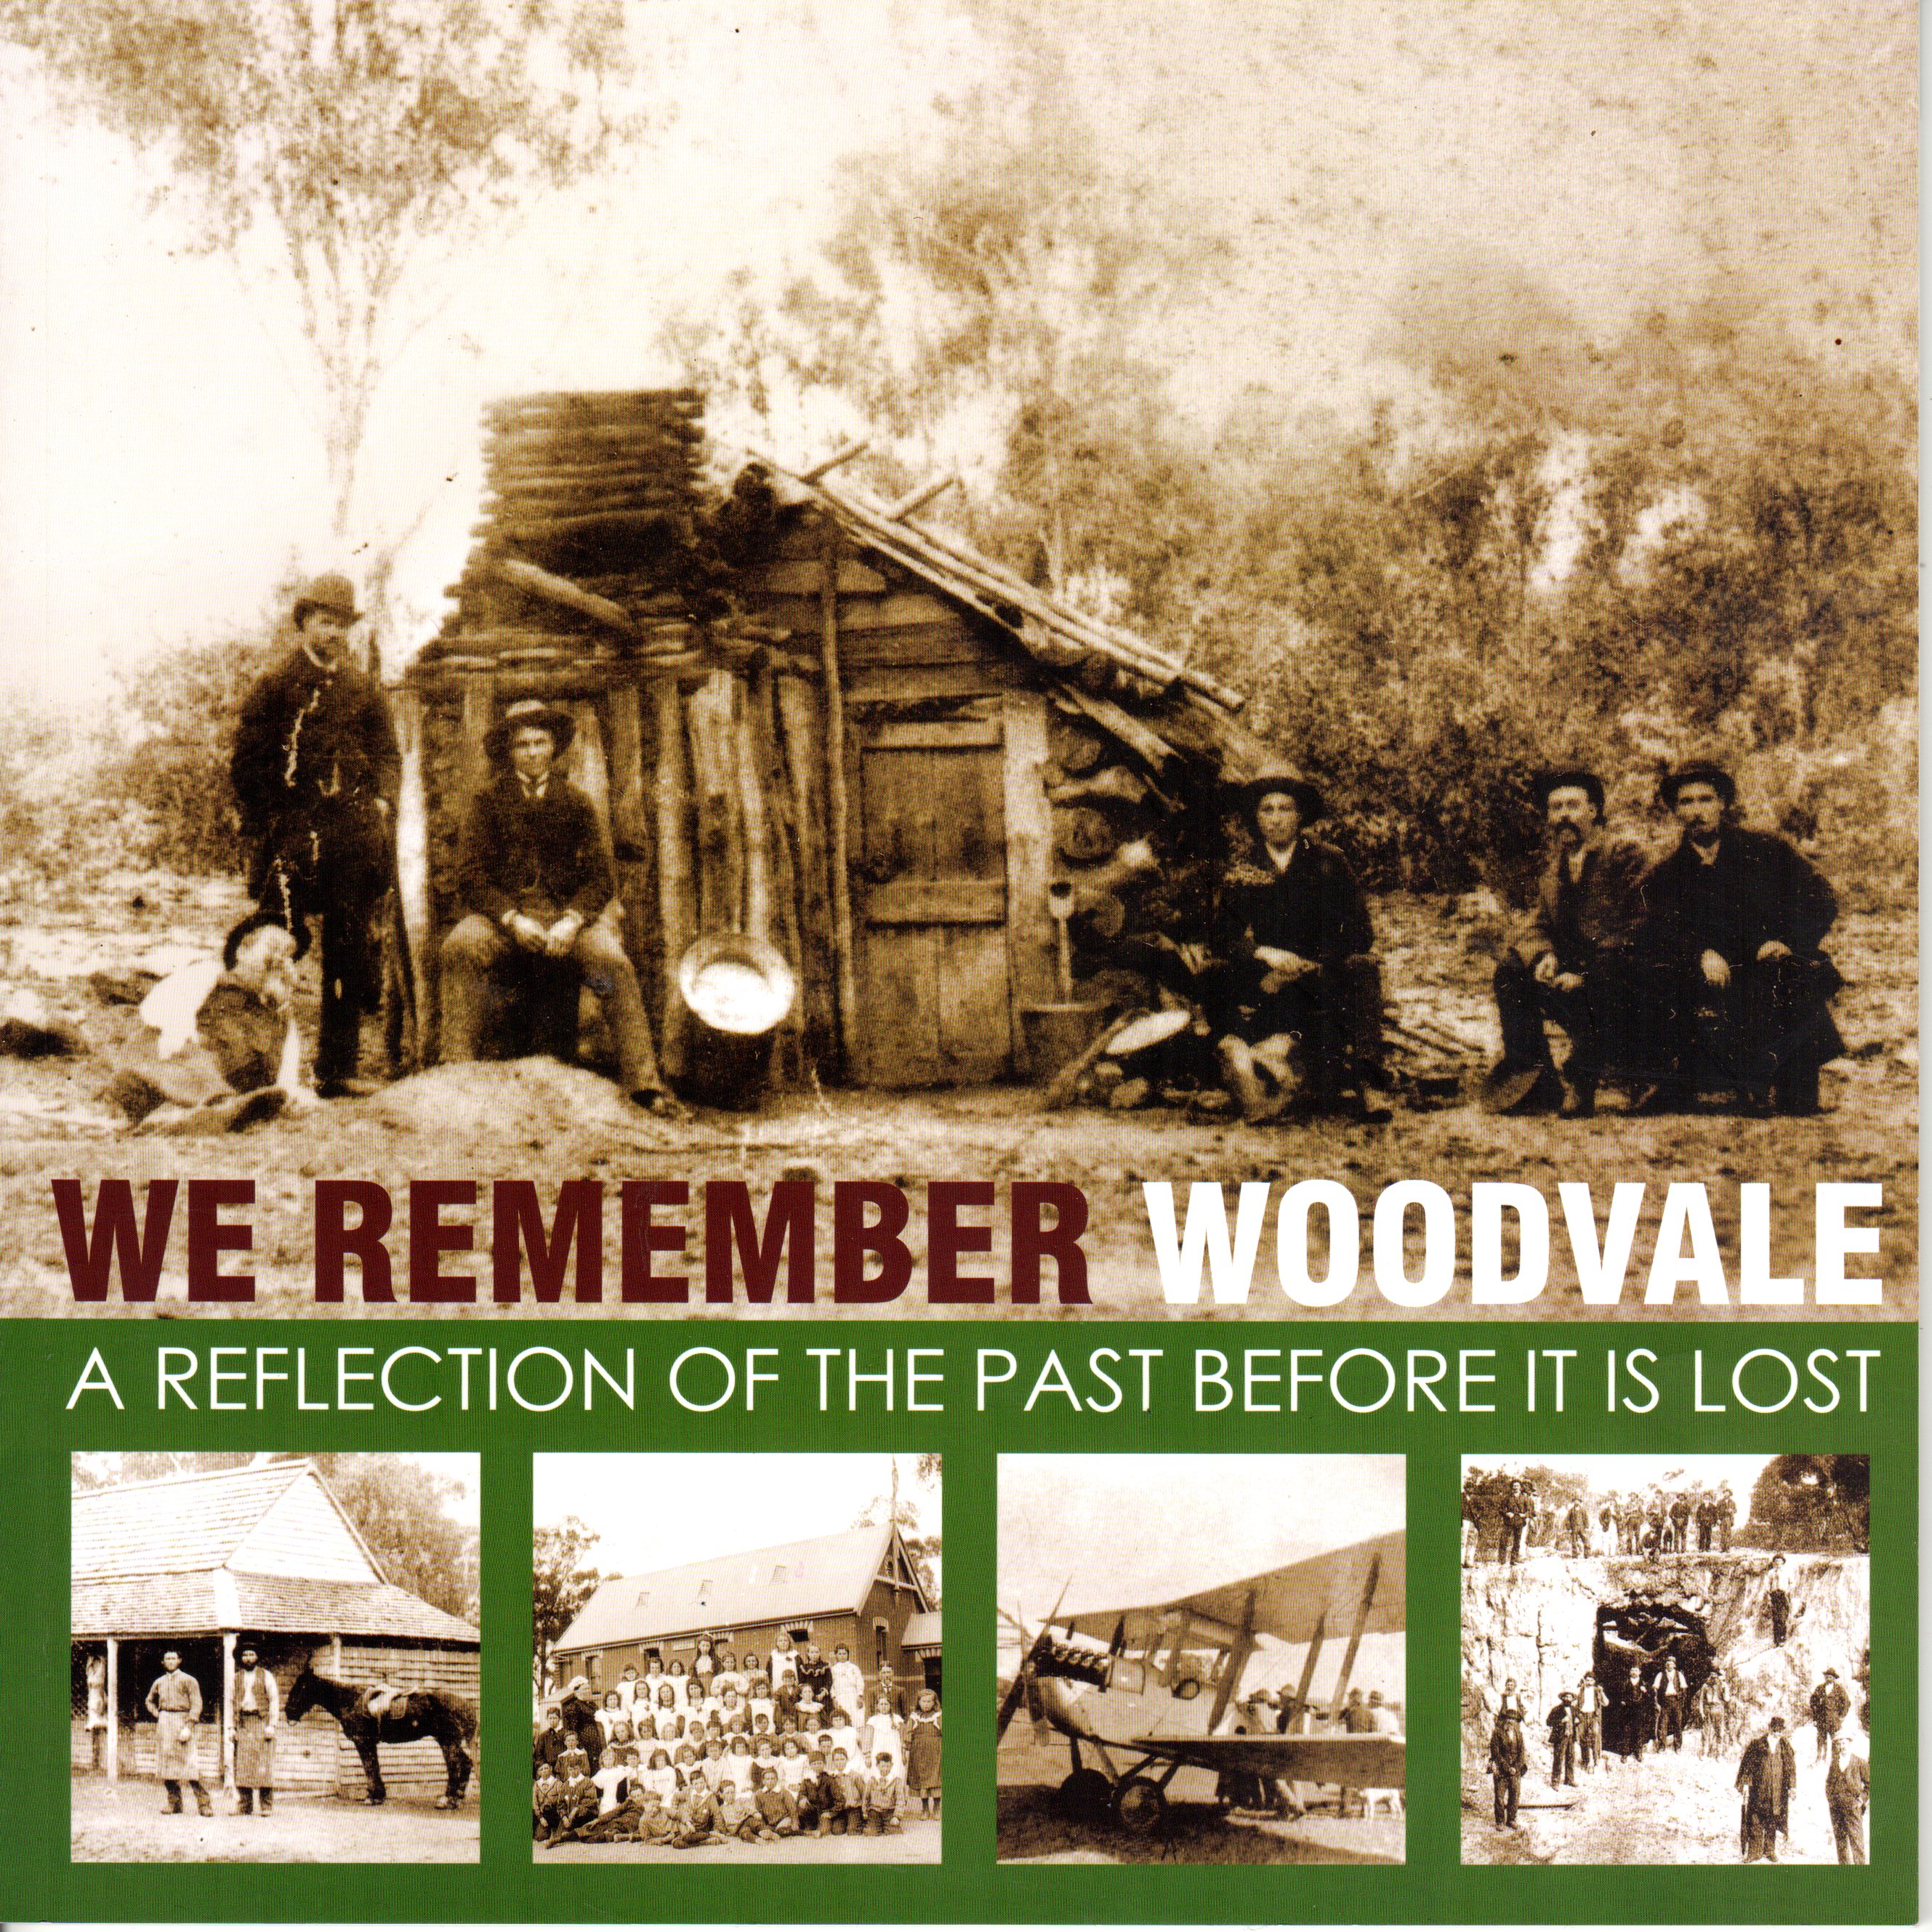 We Remember Woodvale...